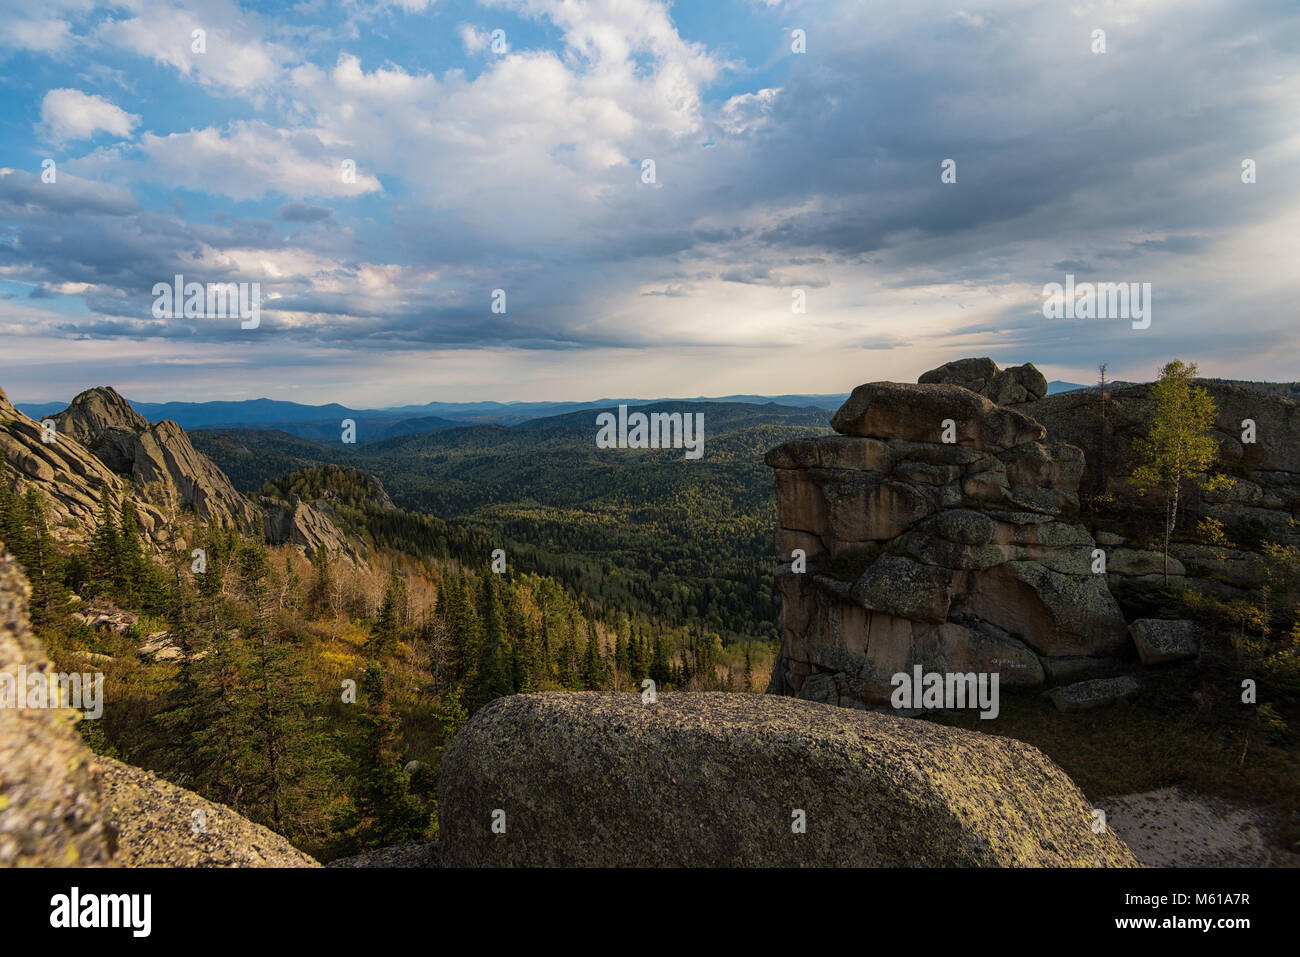 Beauty view in mountains of Altai Stock Photo